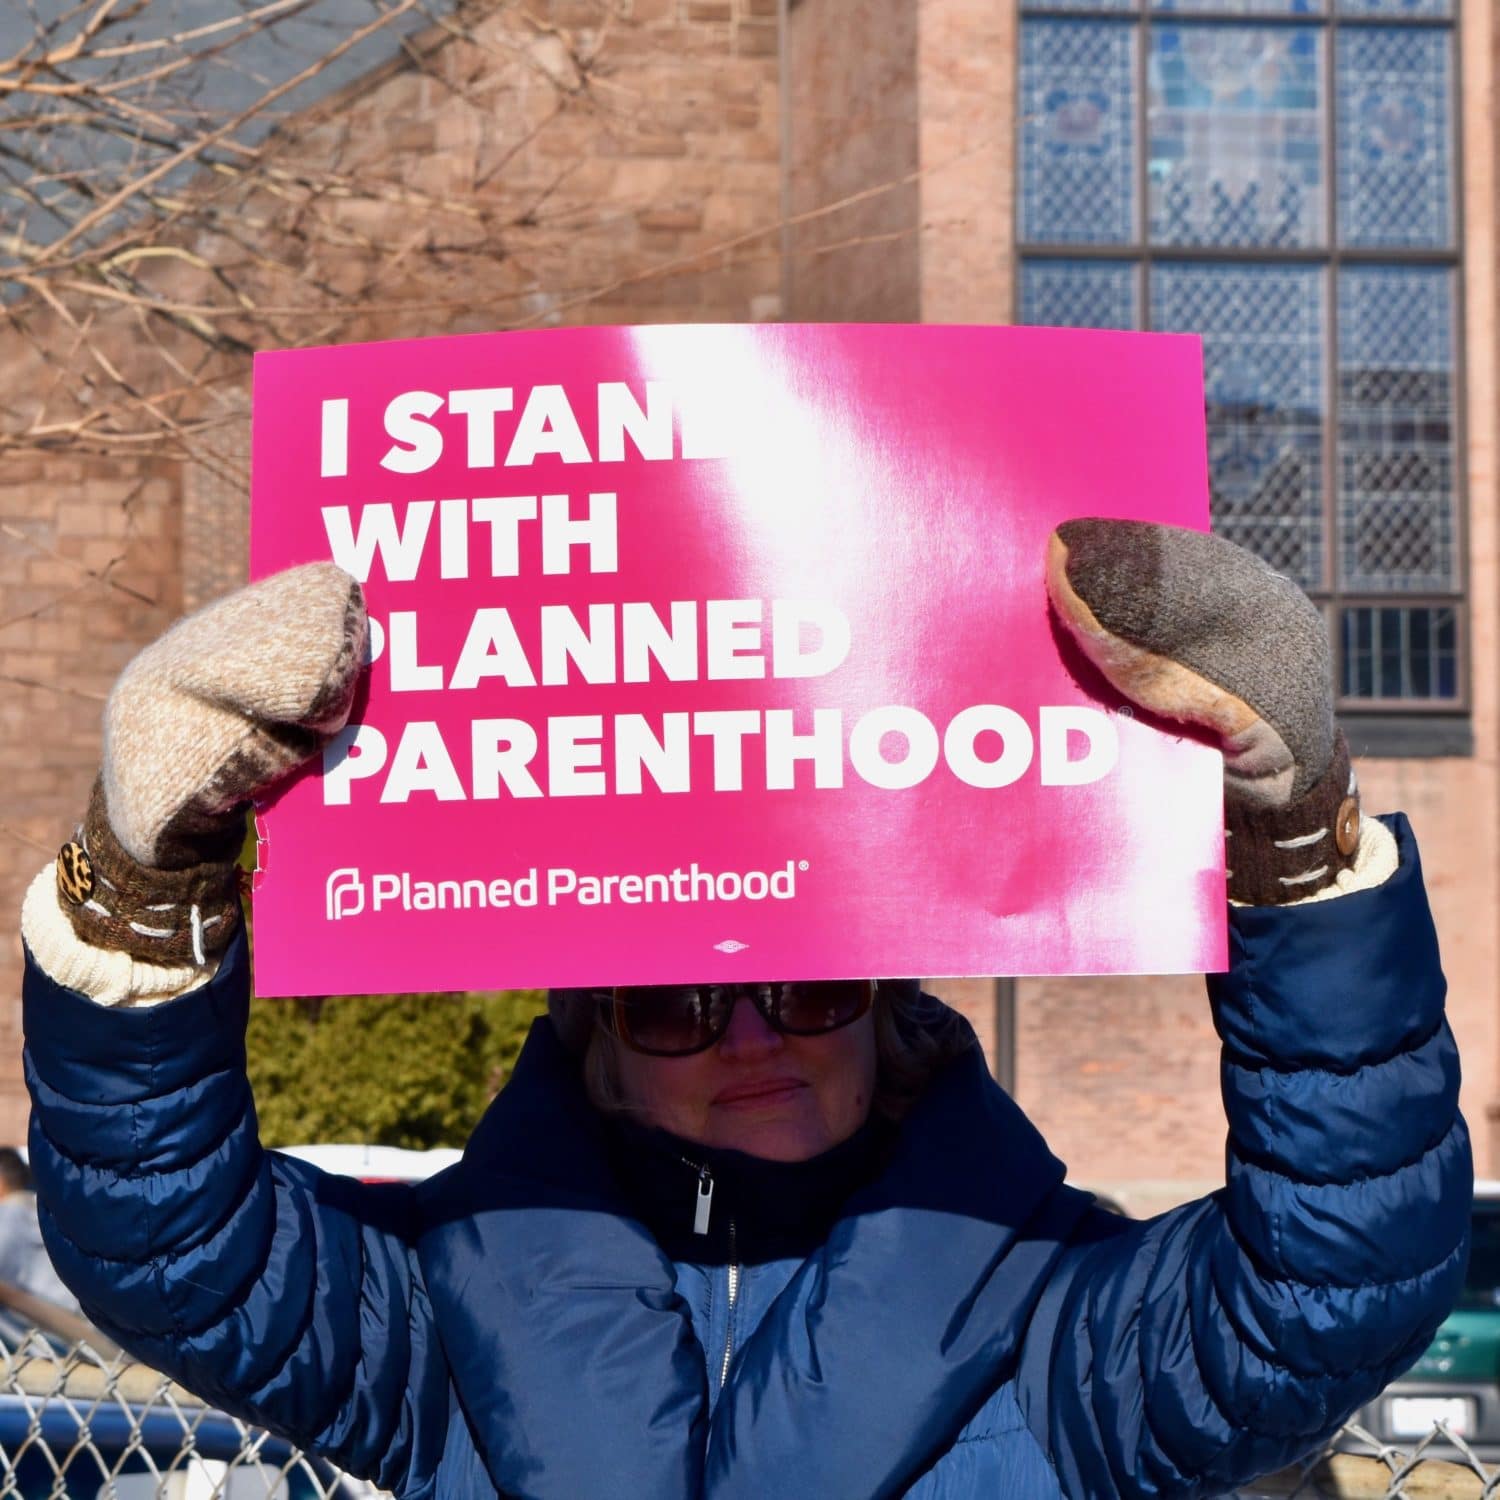 Rhode Island News: Planned Parenthood: Trump releases final gag rule, continuing administration’s attack on people of color, families with low incomes and women